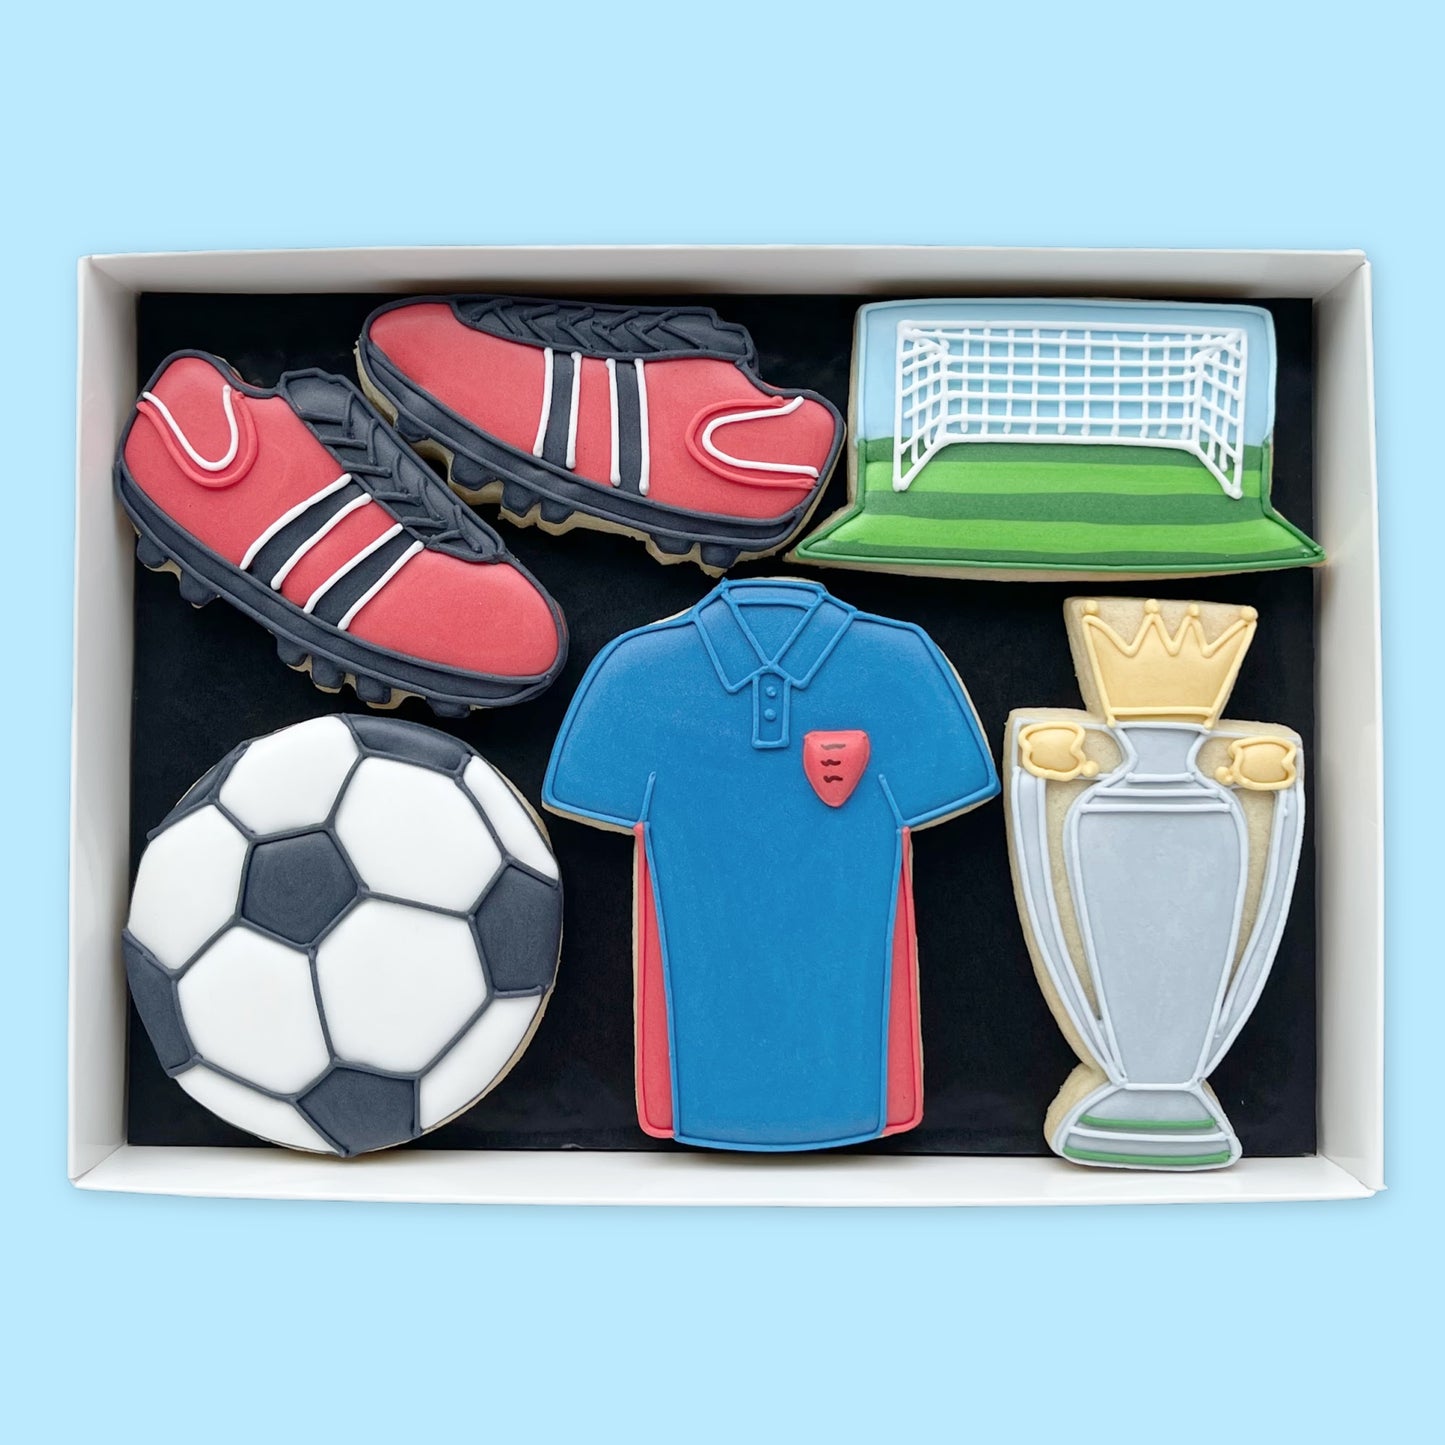 Football themed hand iced biscuits in an open white gift box by Katie's biscuit shop